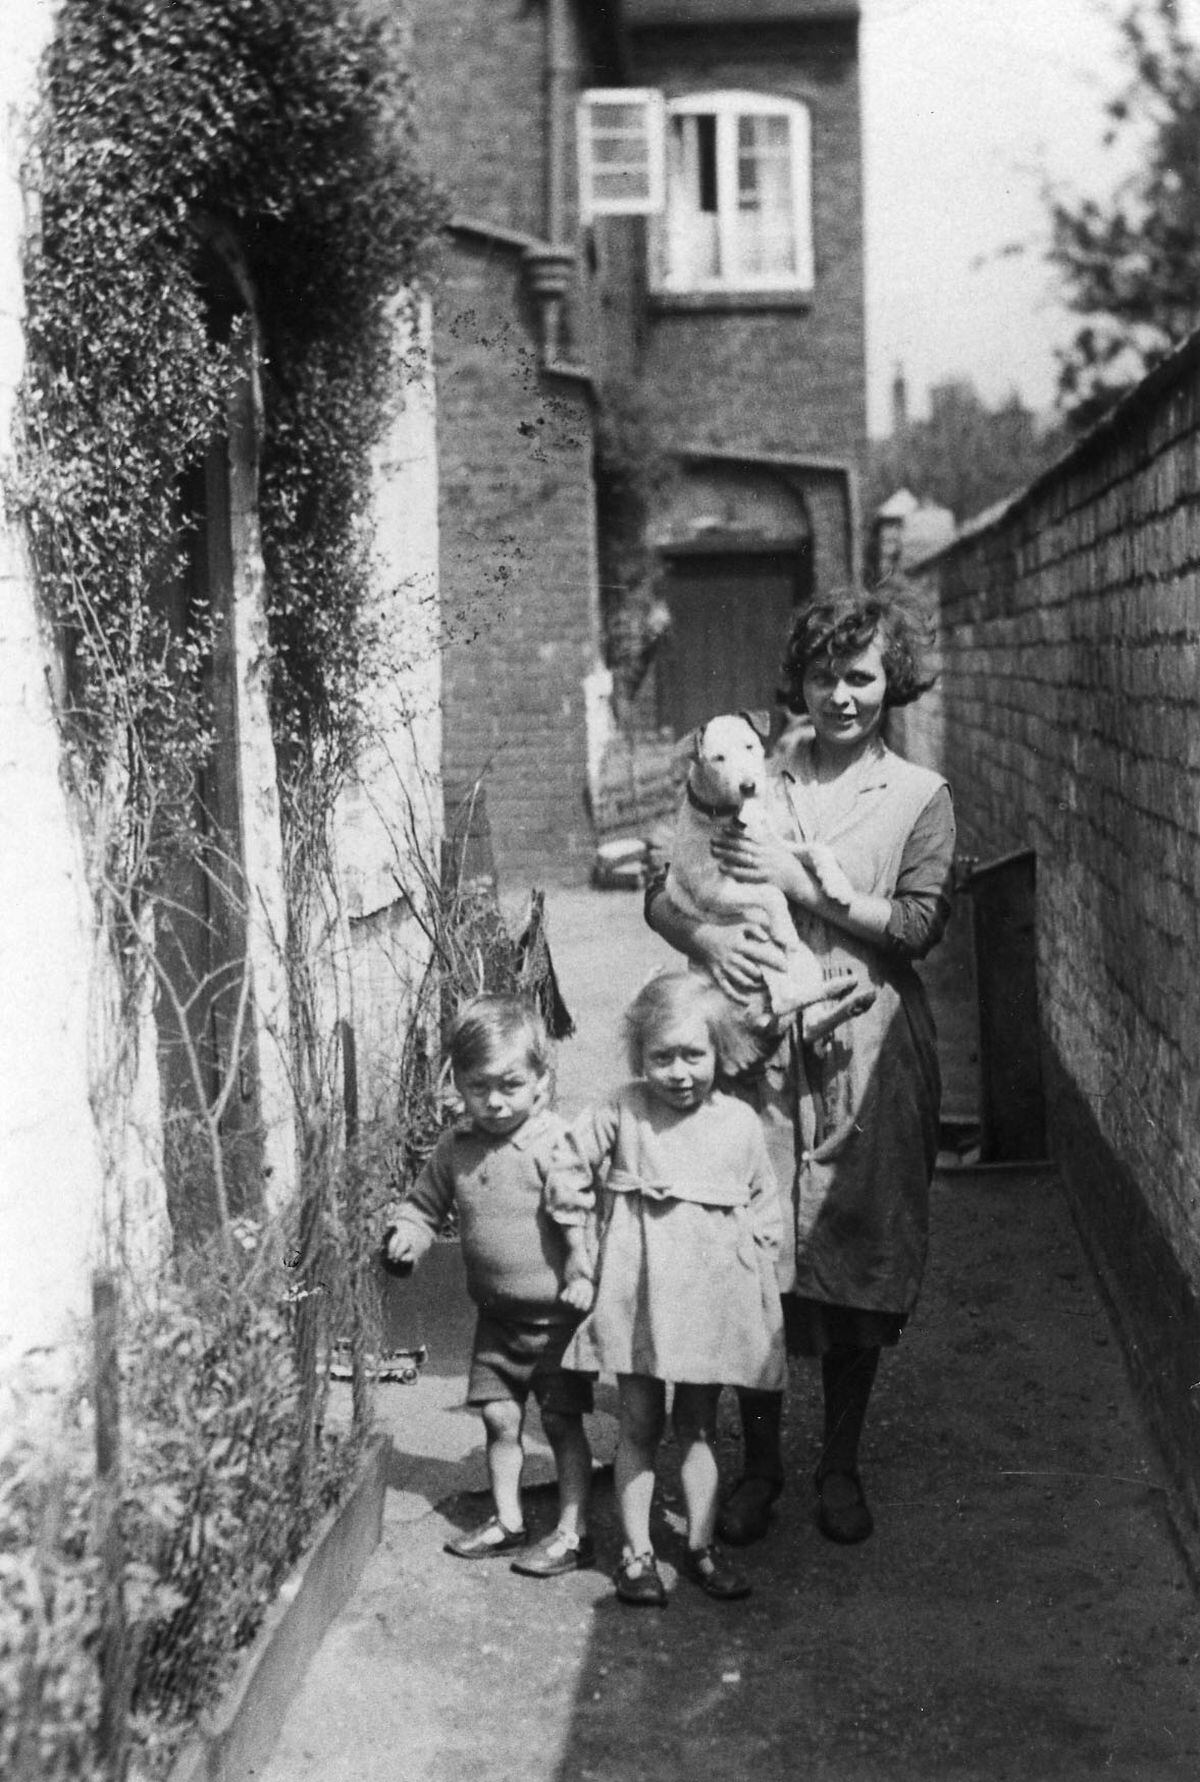 This family were in "Court 10" in 1926. It ran between 99 High Street and Beaumaris Road.